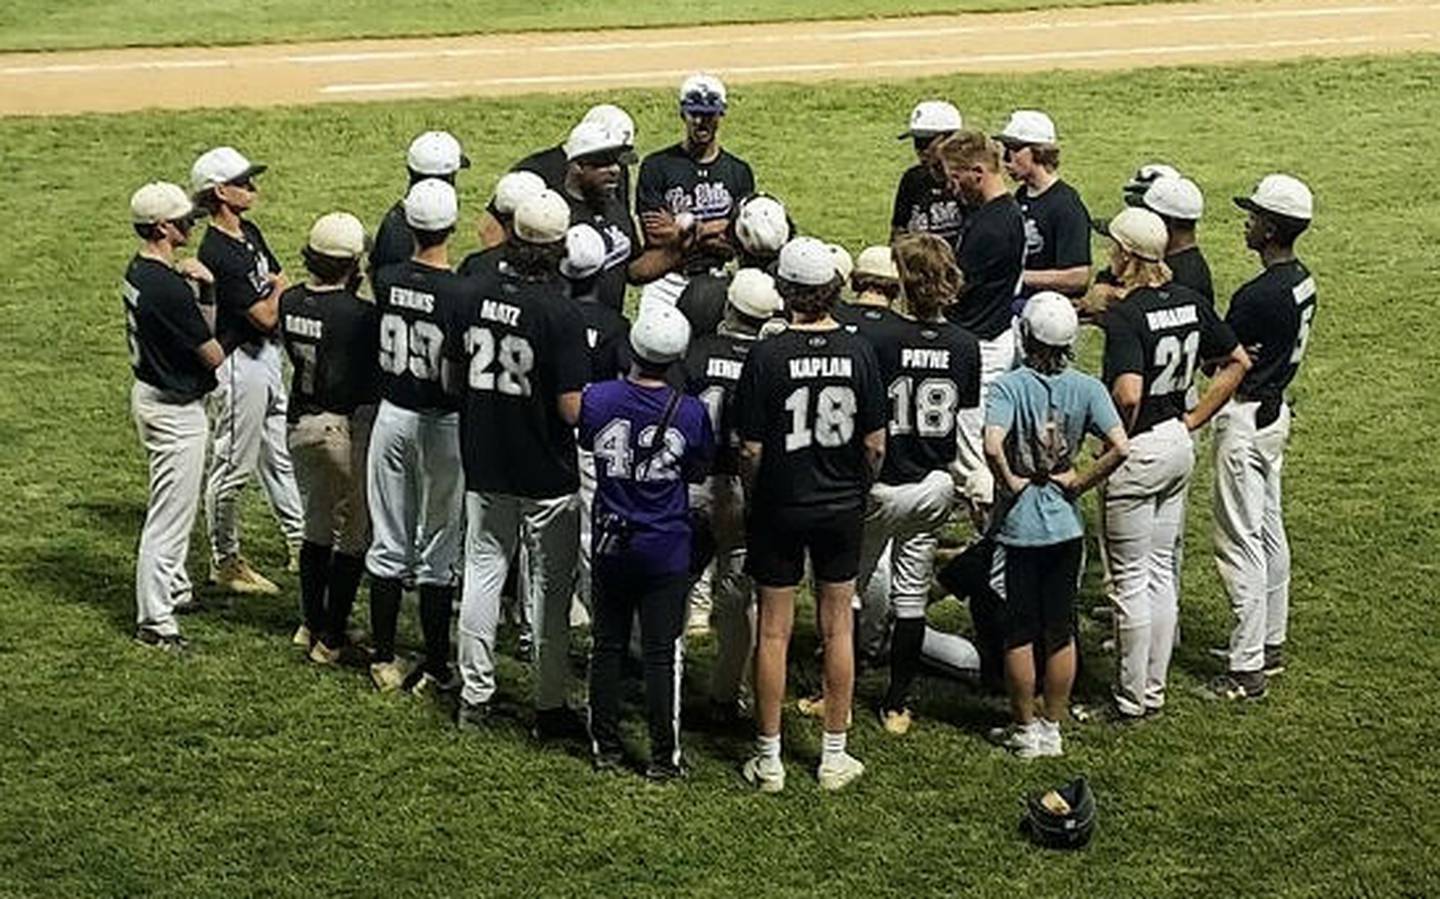 Pikesville's baseball team gather with coach Dominic Peters (middle) after Tuesday's Class 1A state semifinals. The Panthers' season concluded with a 4-1 loss to reigning state champ Clear Spring of Washington County at McCurdy Field in Frederick.